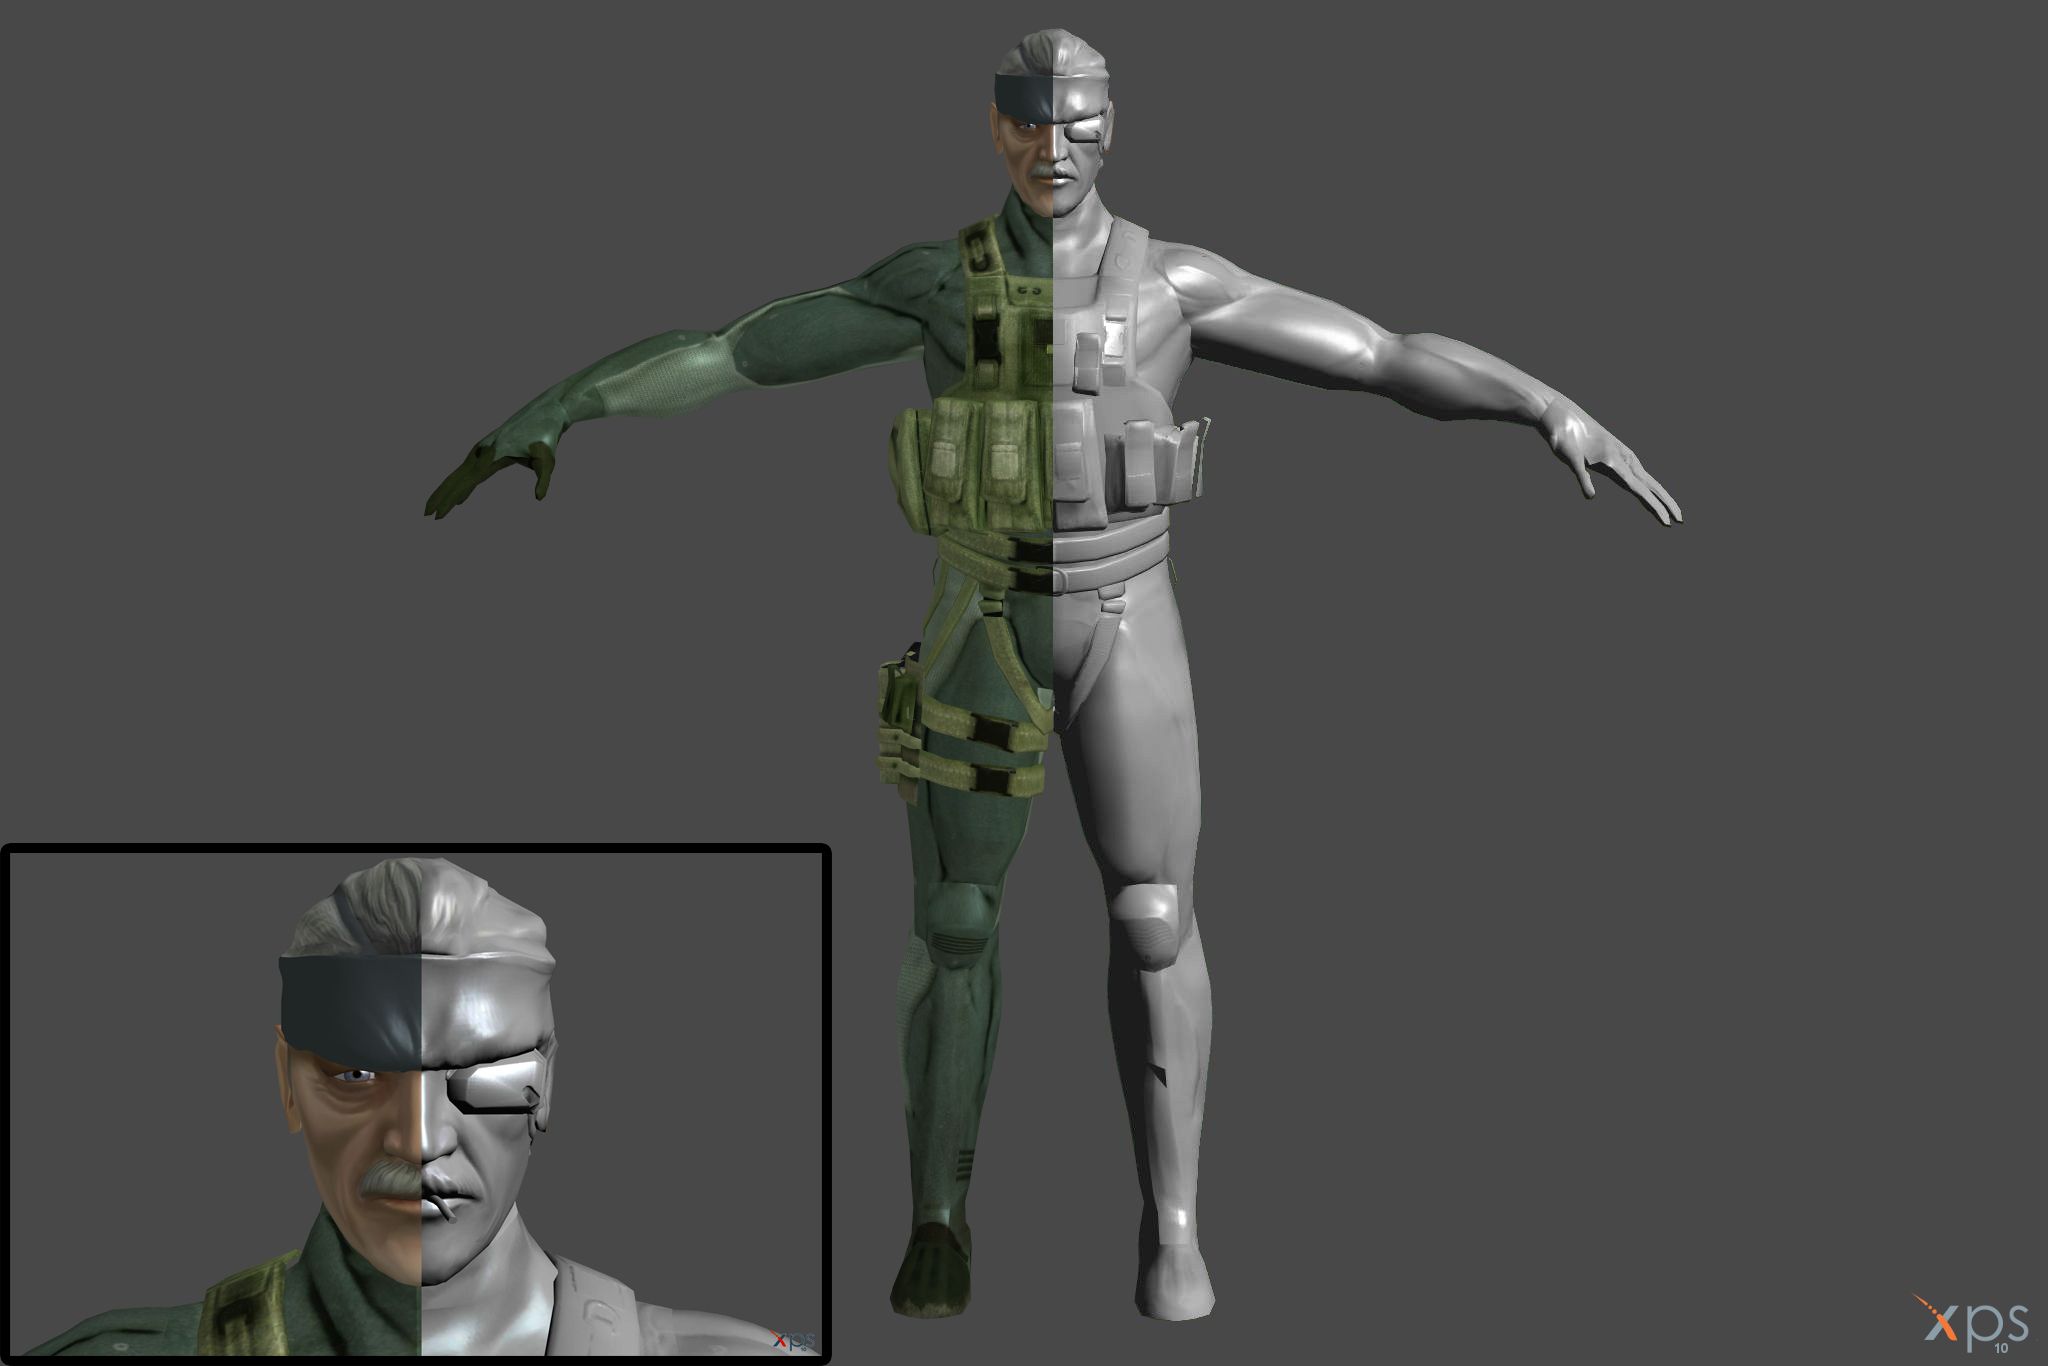 Metal Gear Solid 4' Old Snake by lezisell on DeviantArt